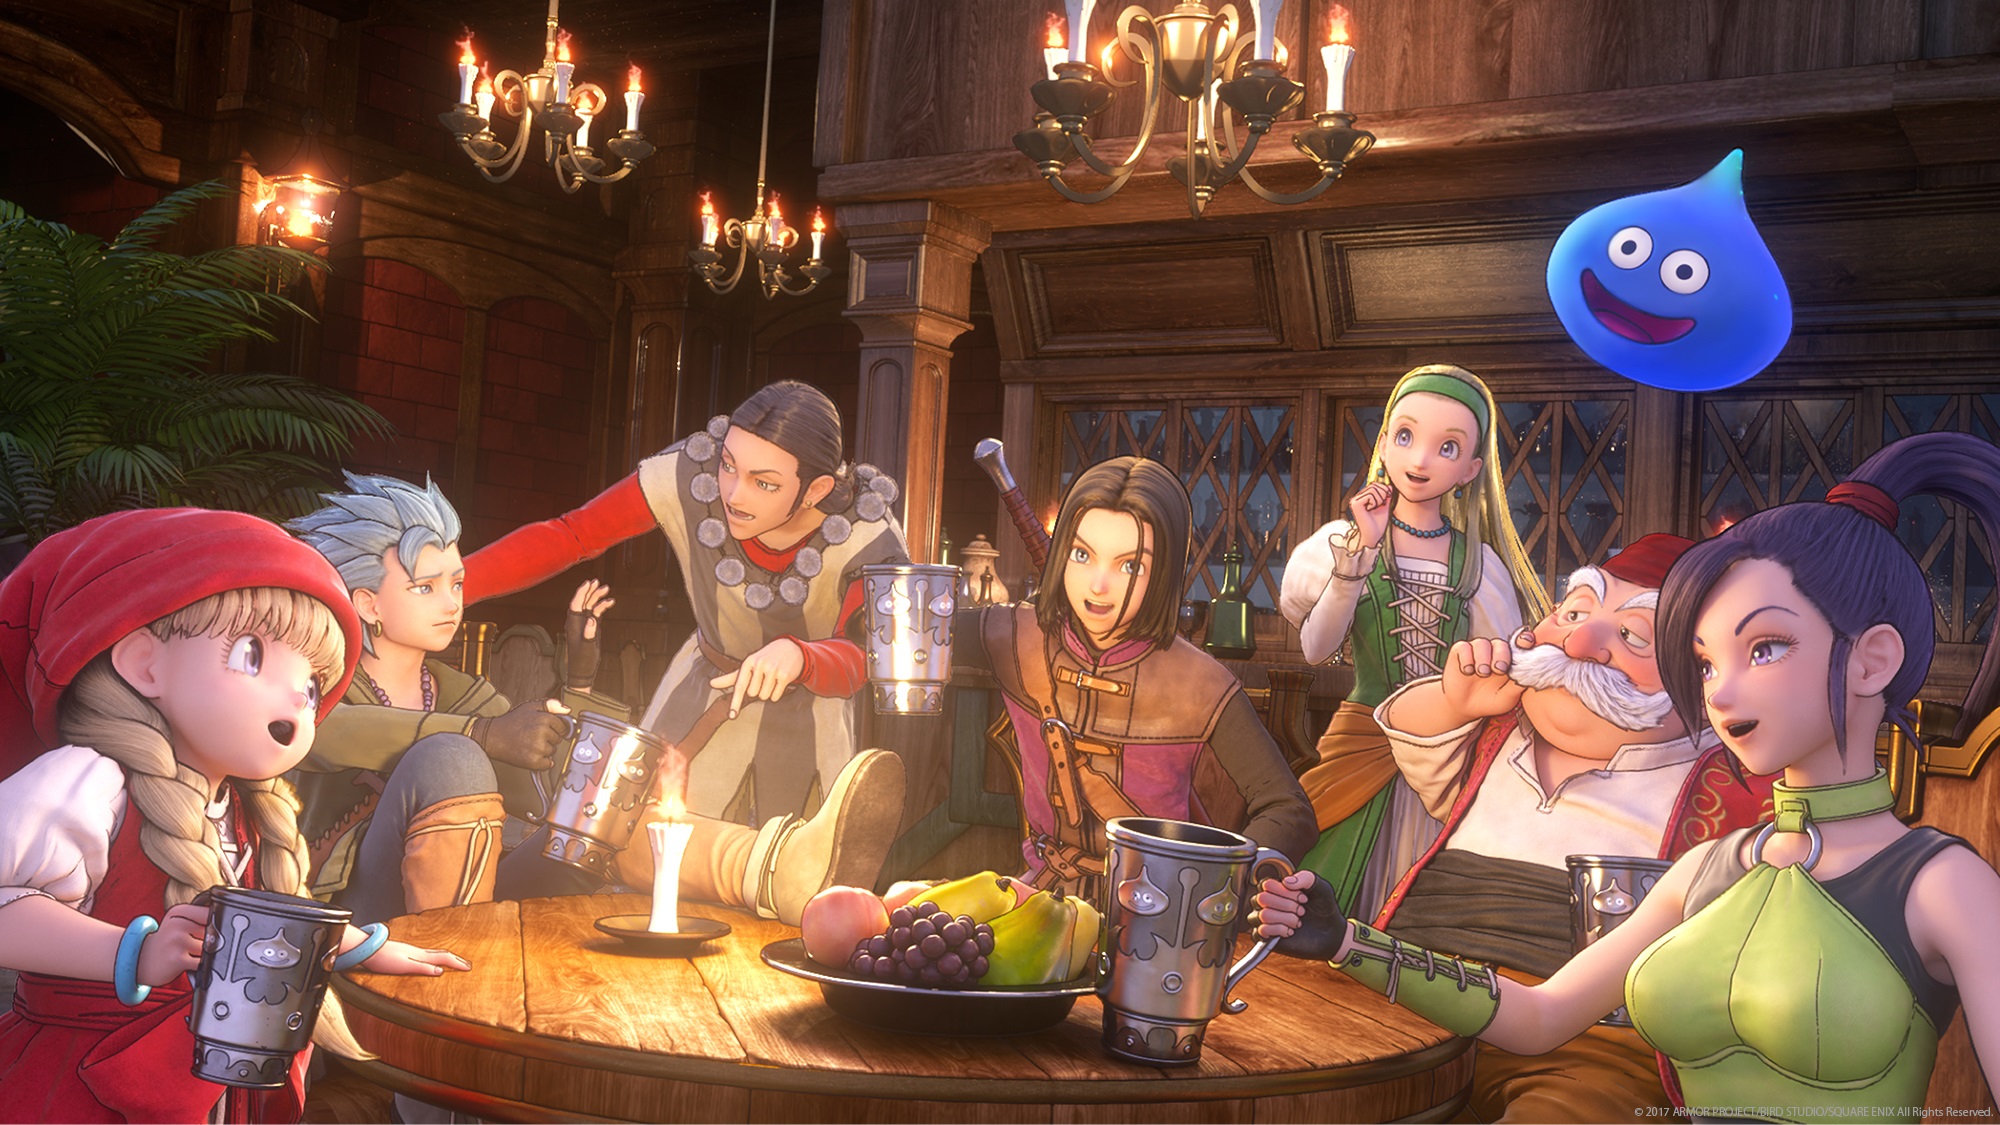 Dragon Quest Xi S Echoes Of An Elusive Age Definitive Edition 11 02 20 1